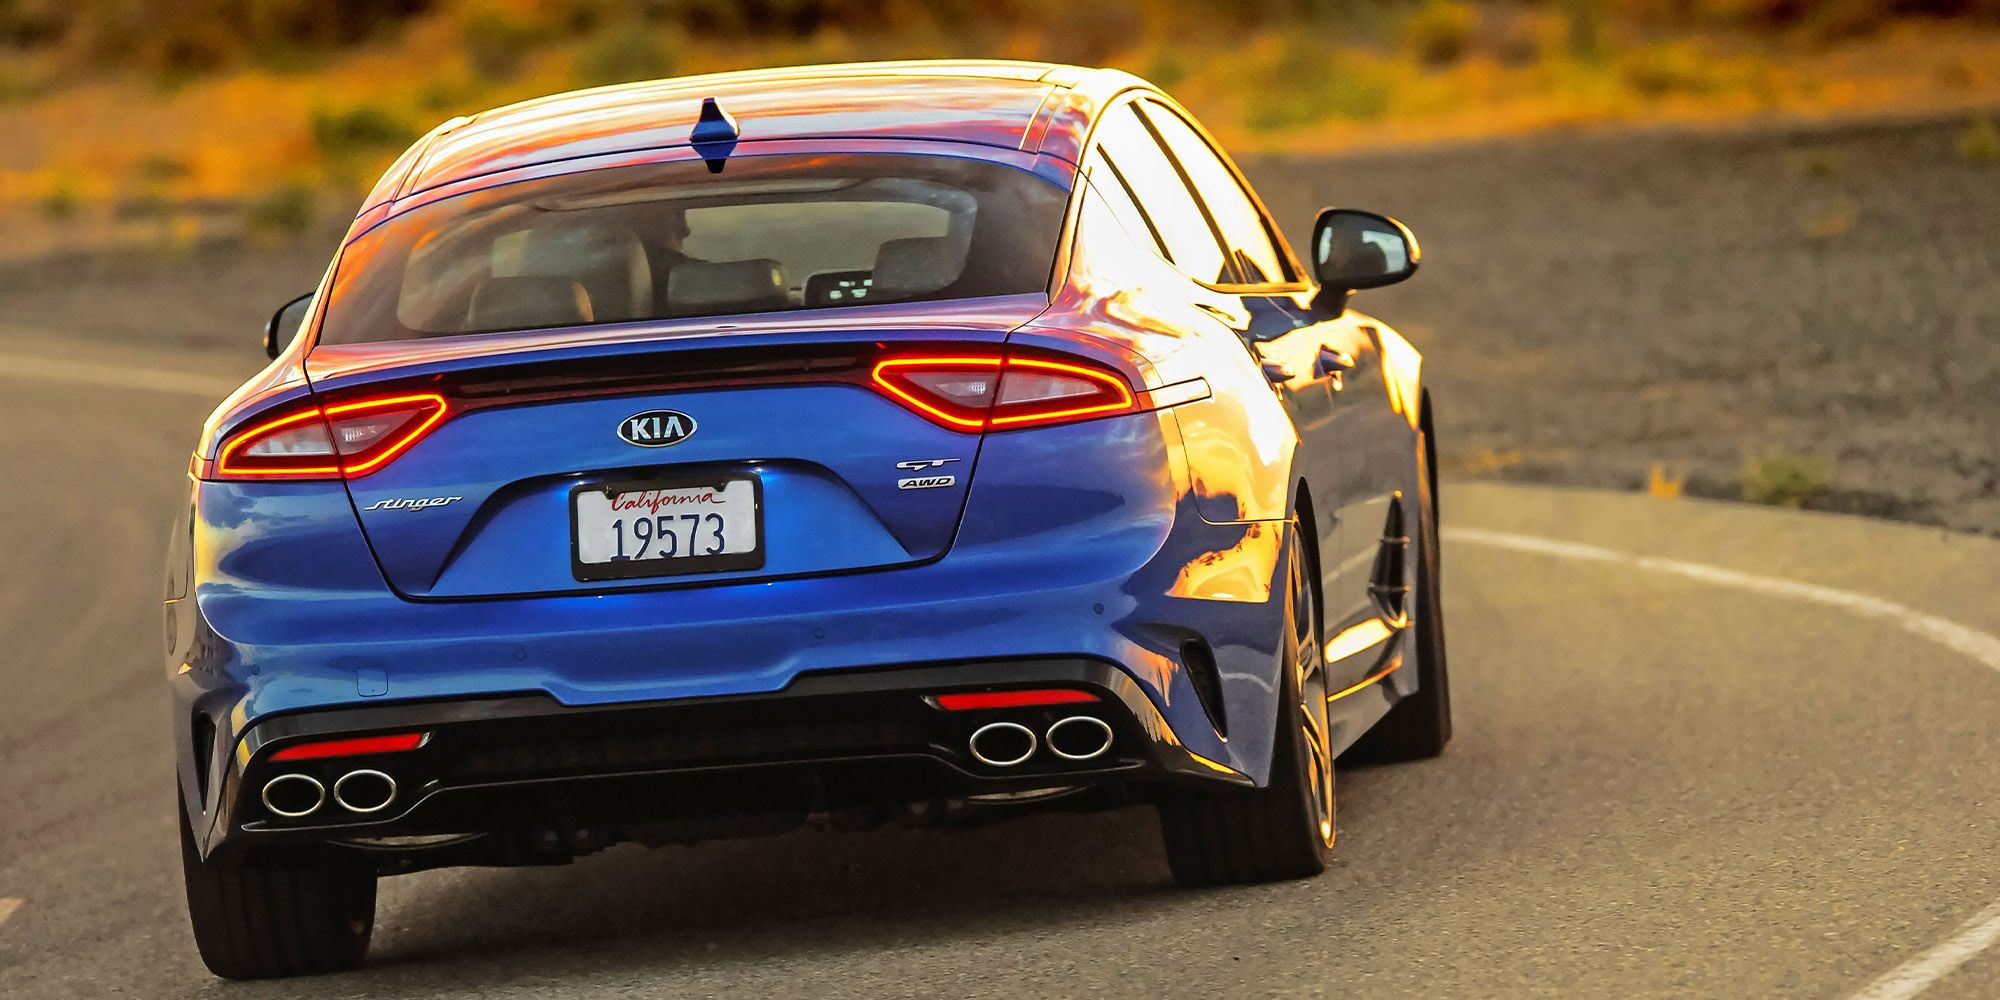 The rear of a blue Stinger GT